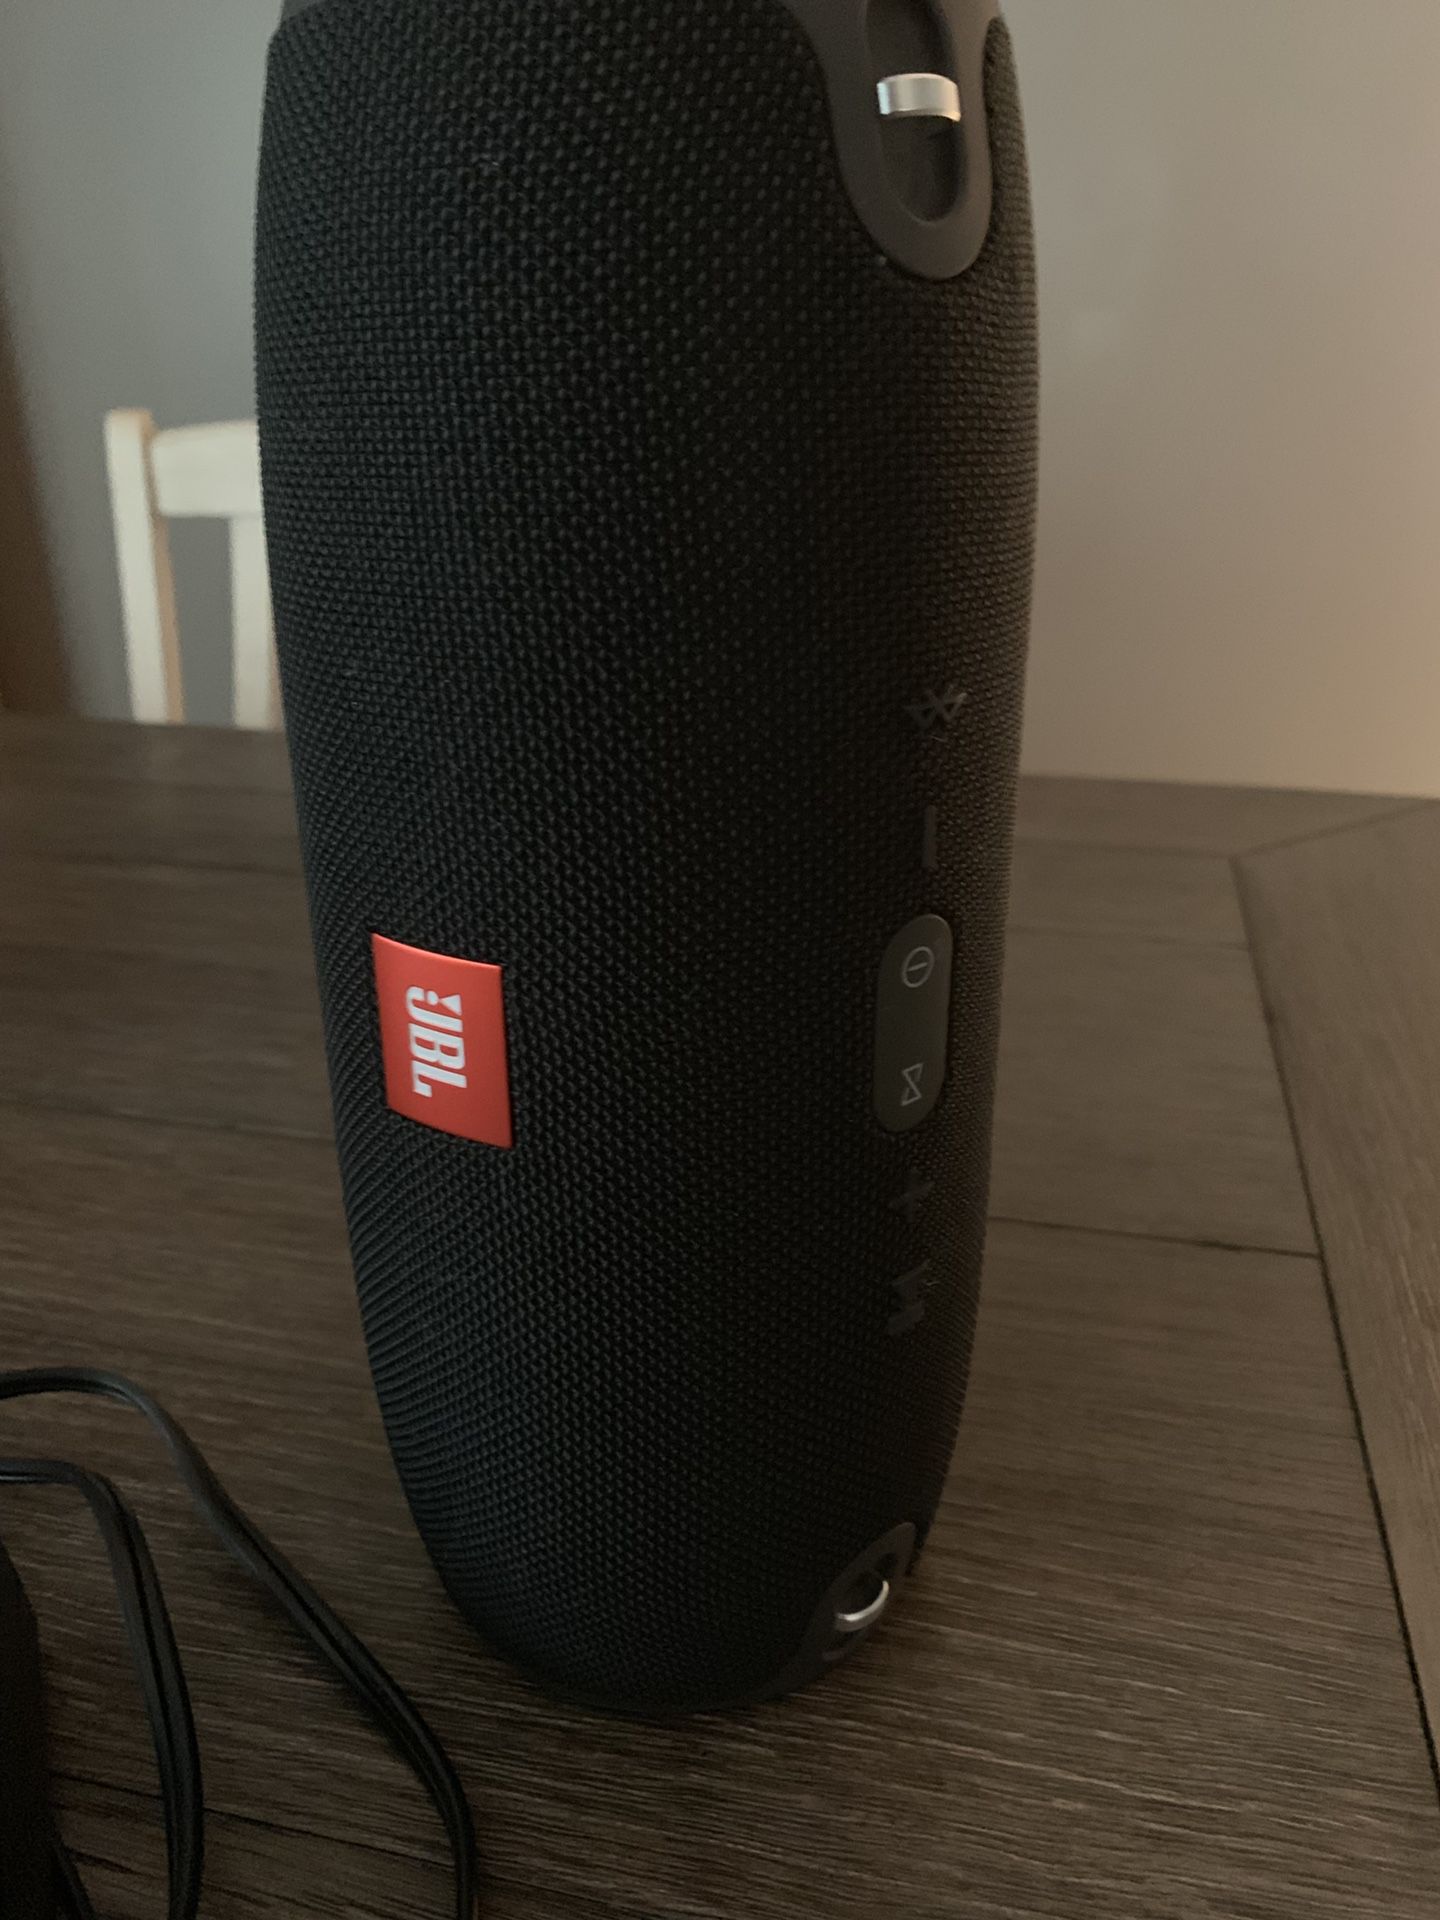 JBL EXTREME BLUETOOTH SPEAKER. WORKS GREAT. USED 3 TIMES